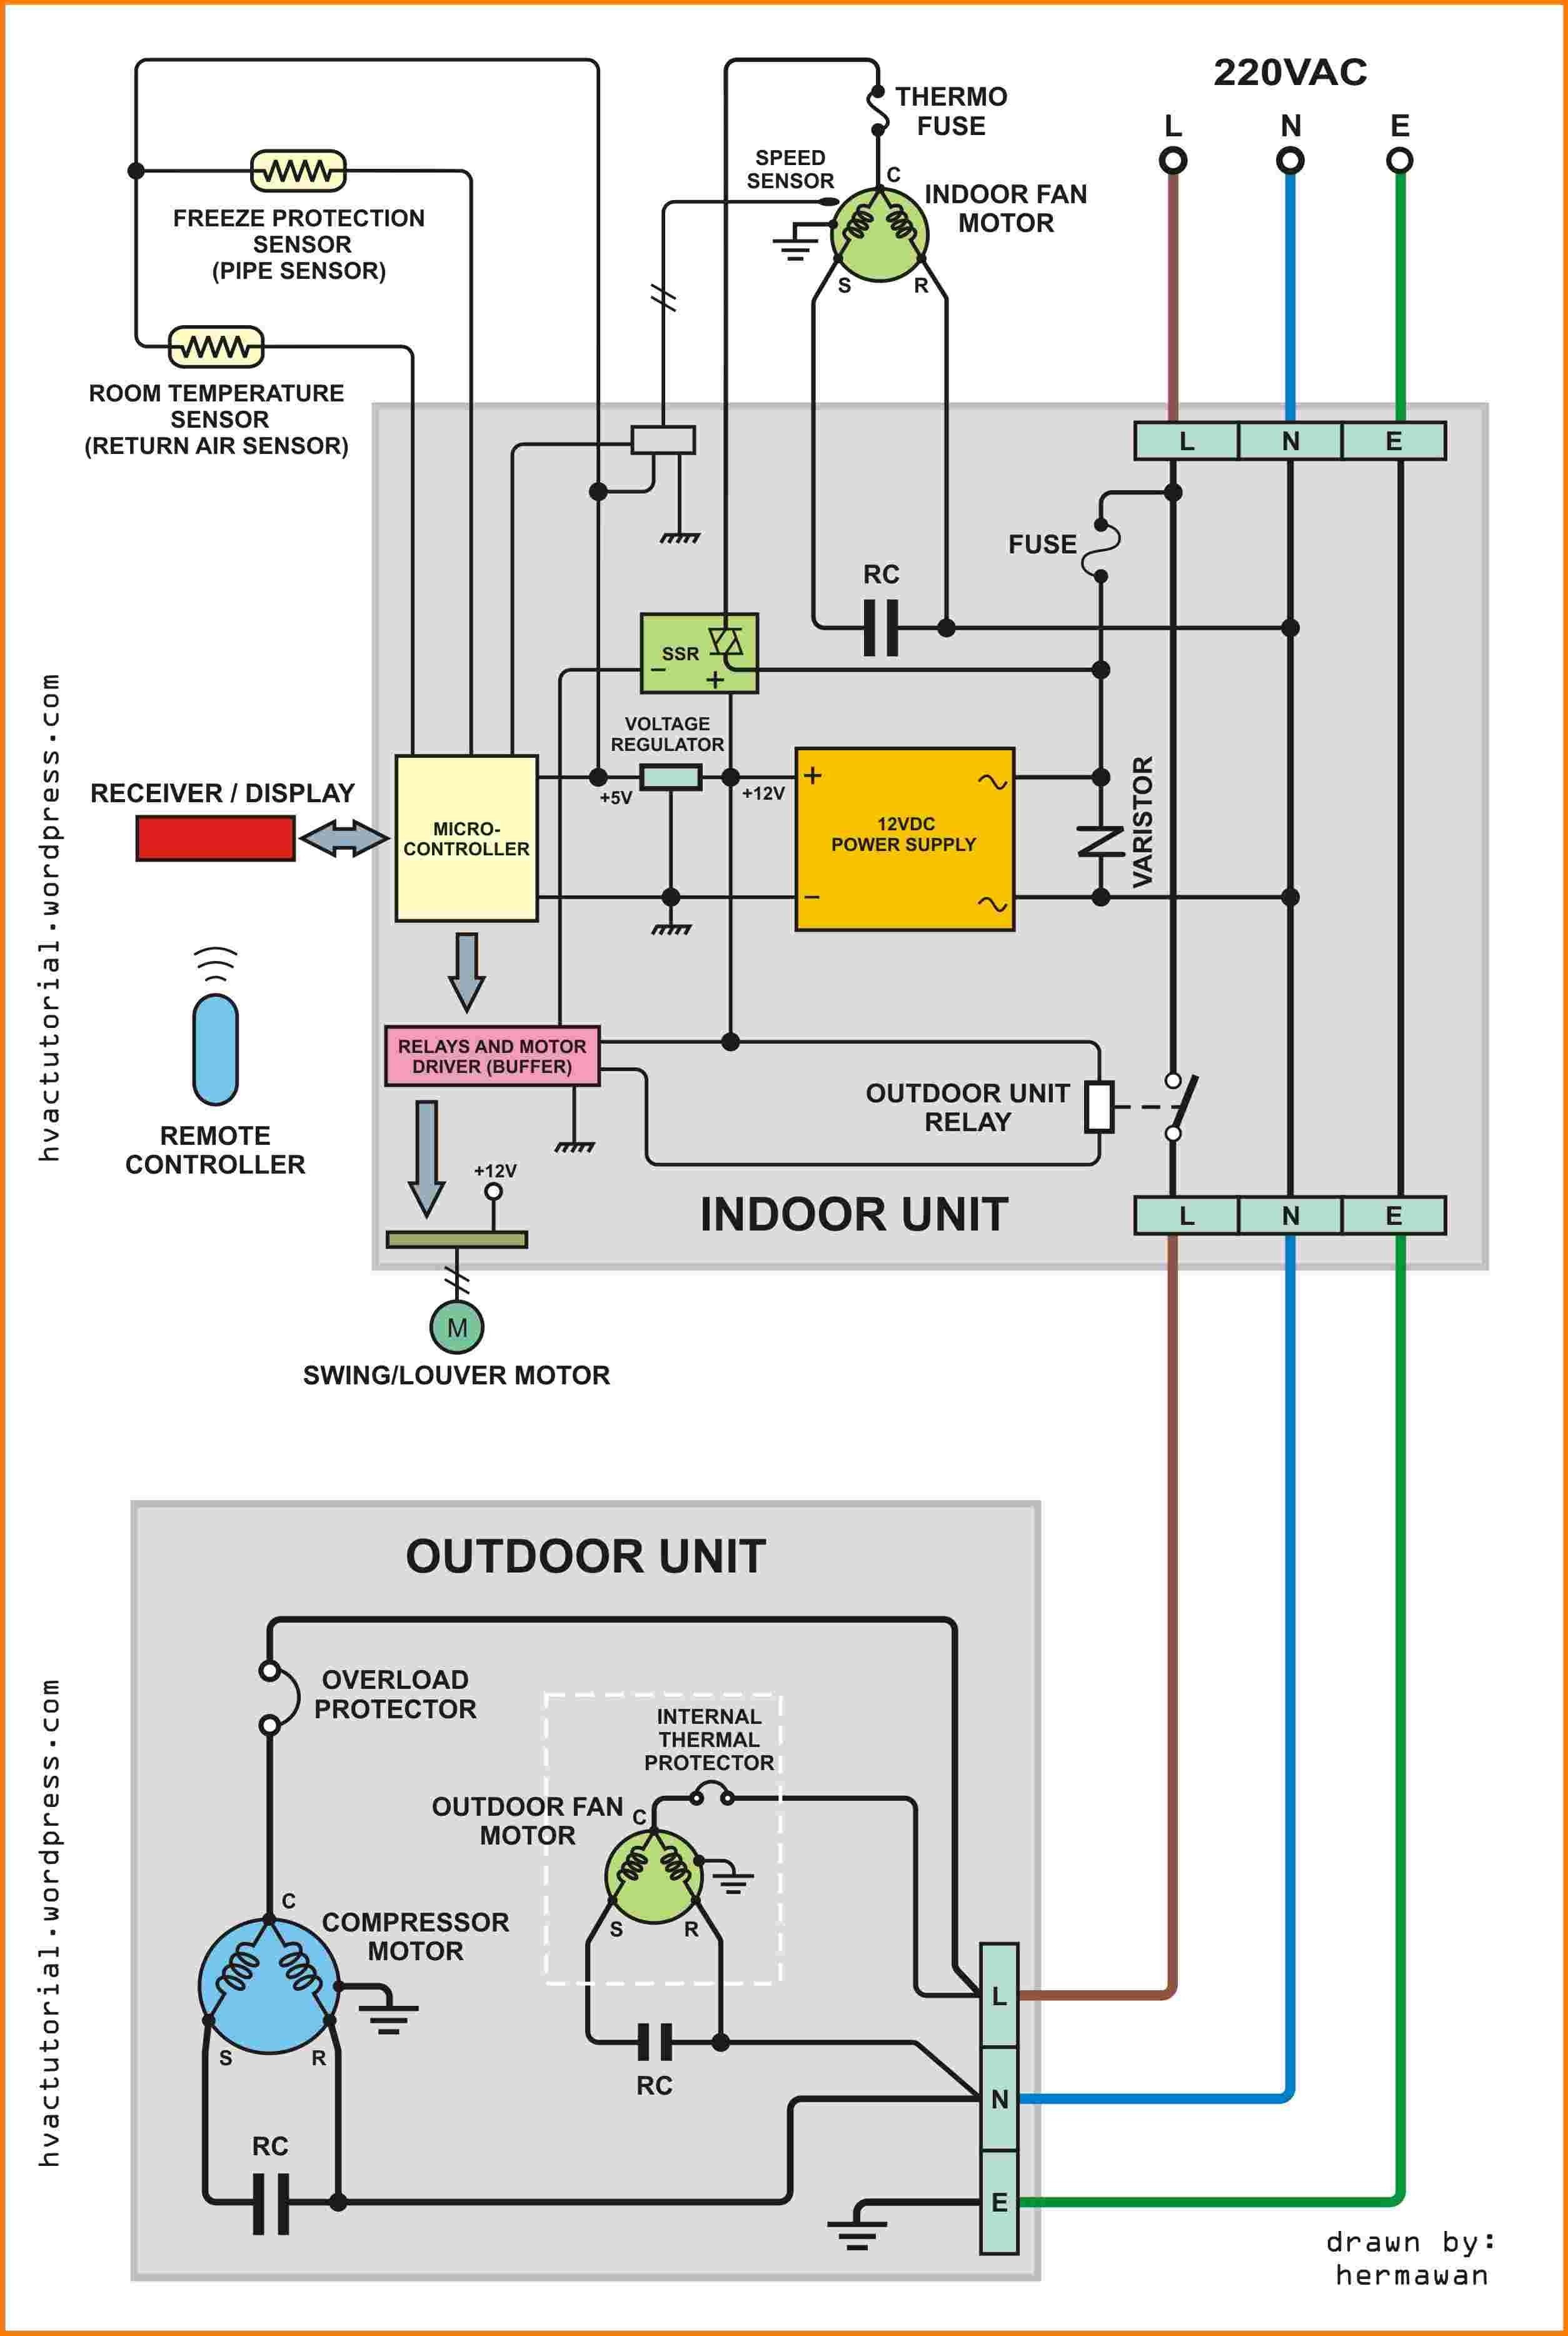 Wiring Diagram for A Heat Pump thermostat Free Download Wiring 2 Wire thermostat Diagram